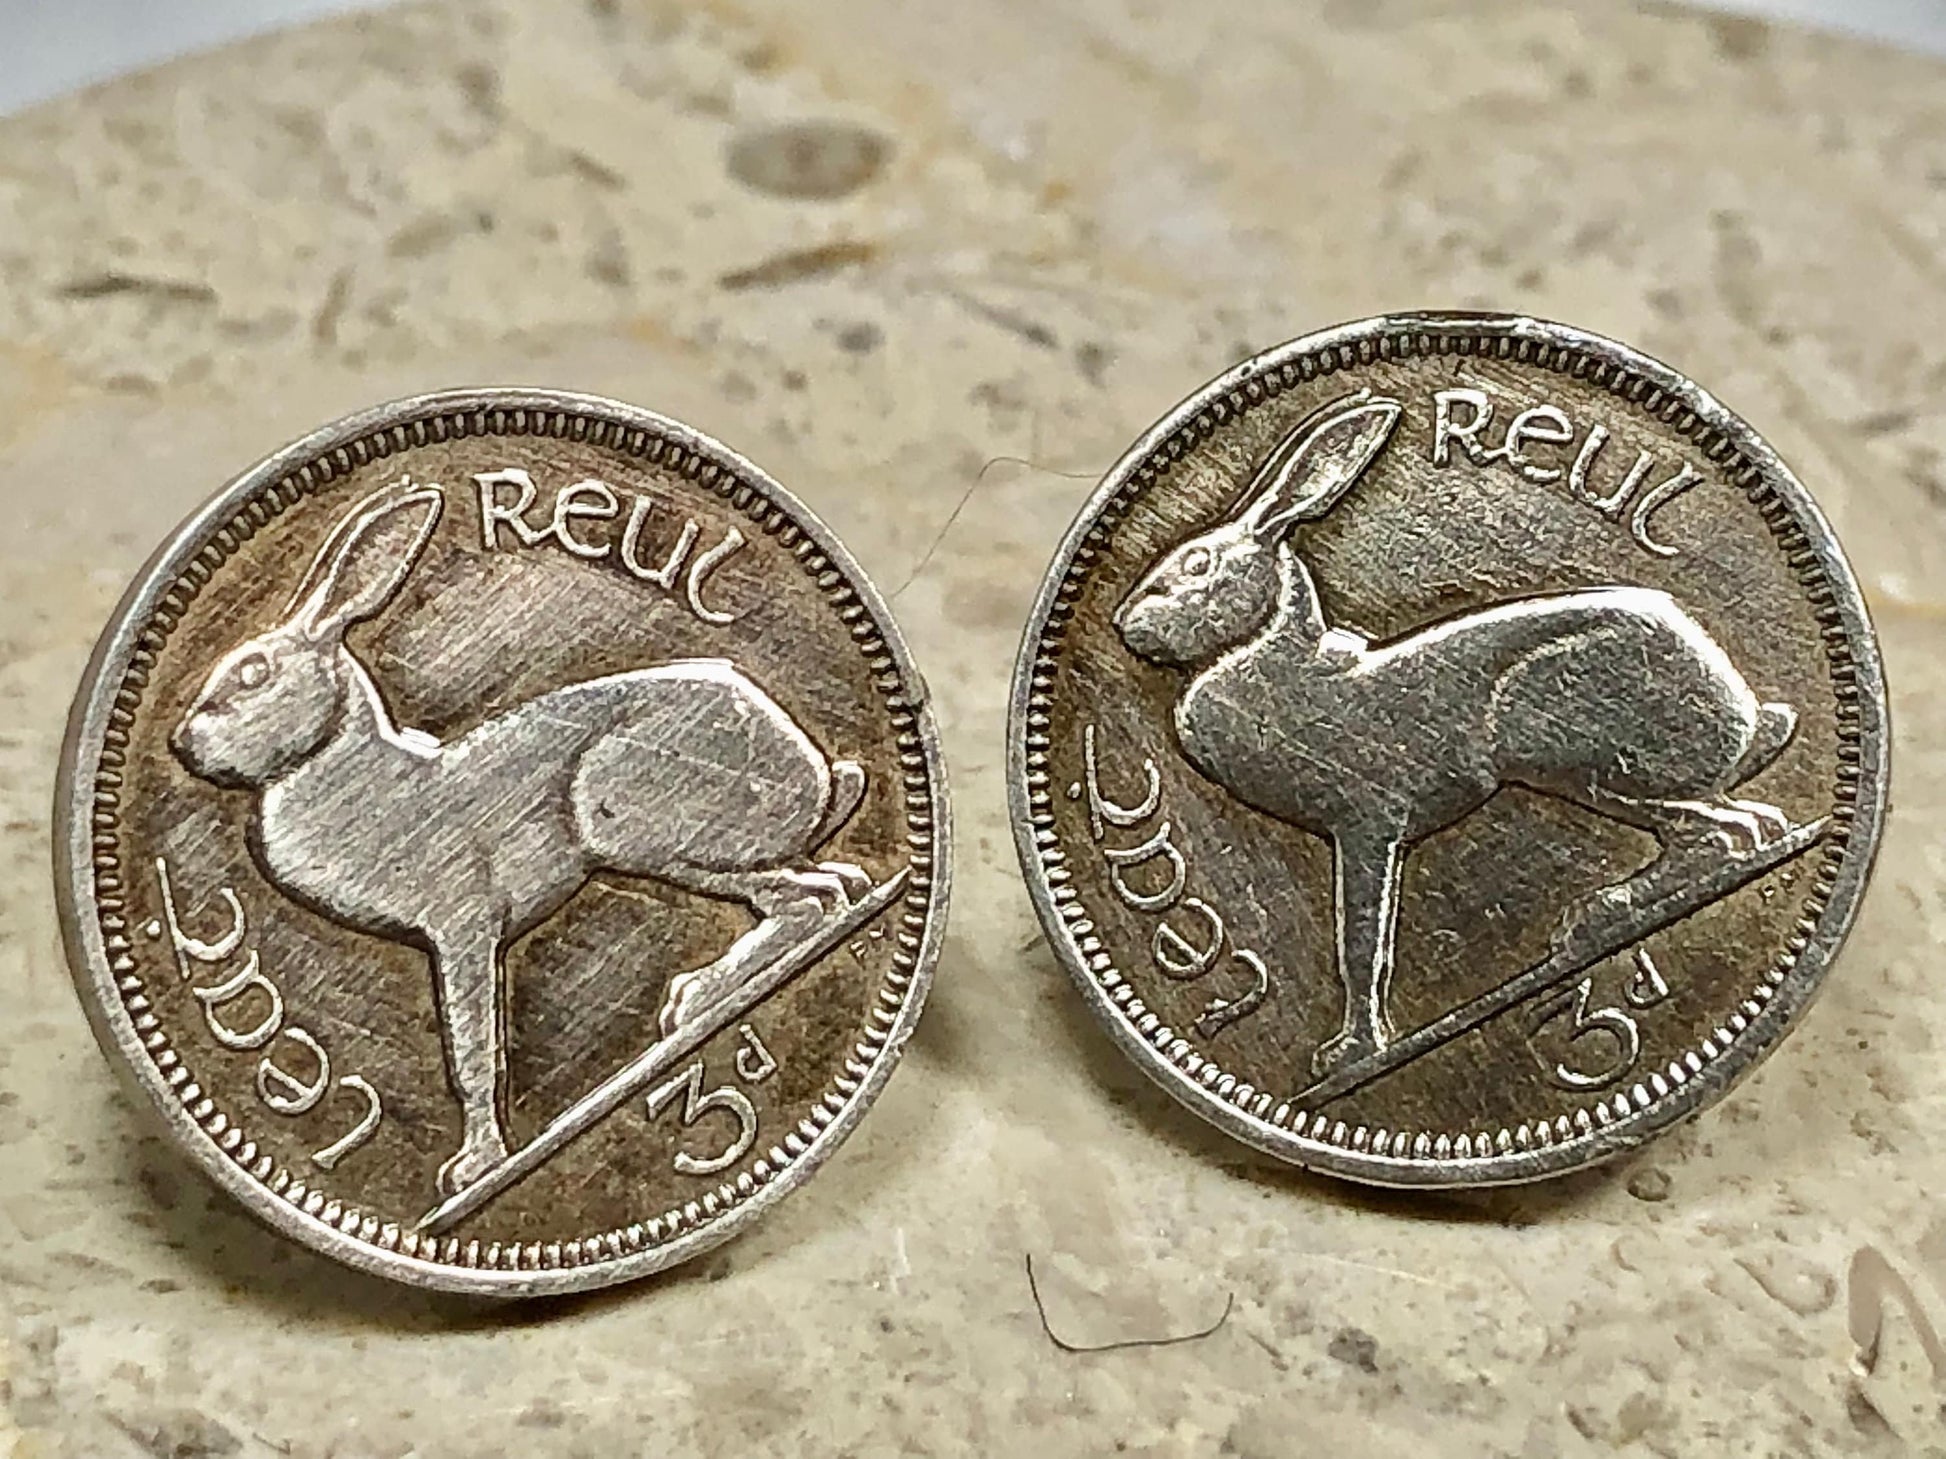 Ireland Coin Stud Earrings Irish 3 Pence Rabbit Hare Personal Vintage Handmade Jewelry Gift Friend Charm For Him Her World Coin Collector